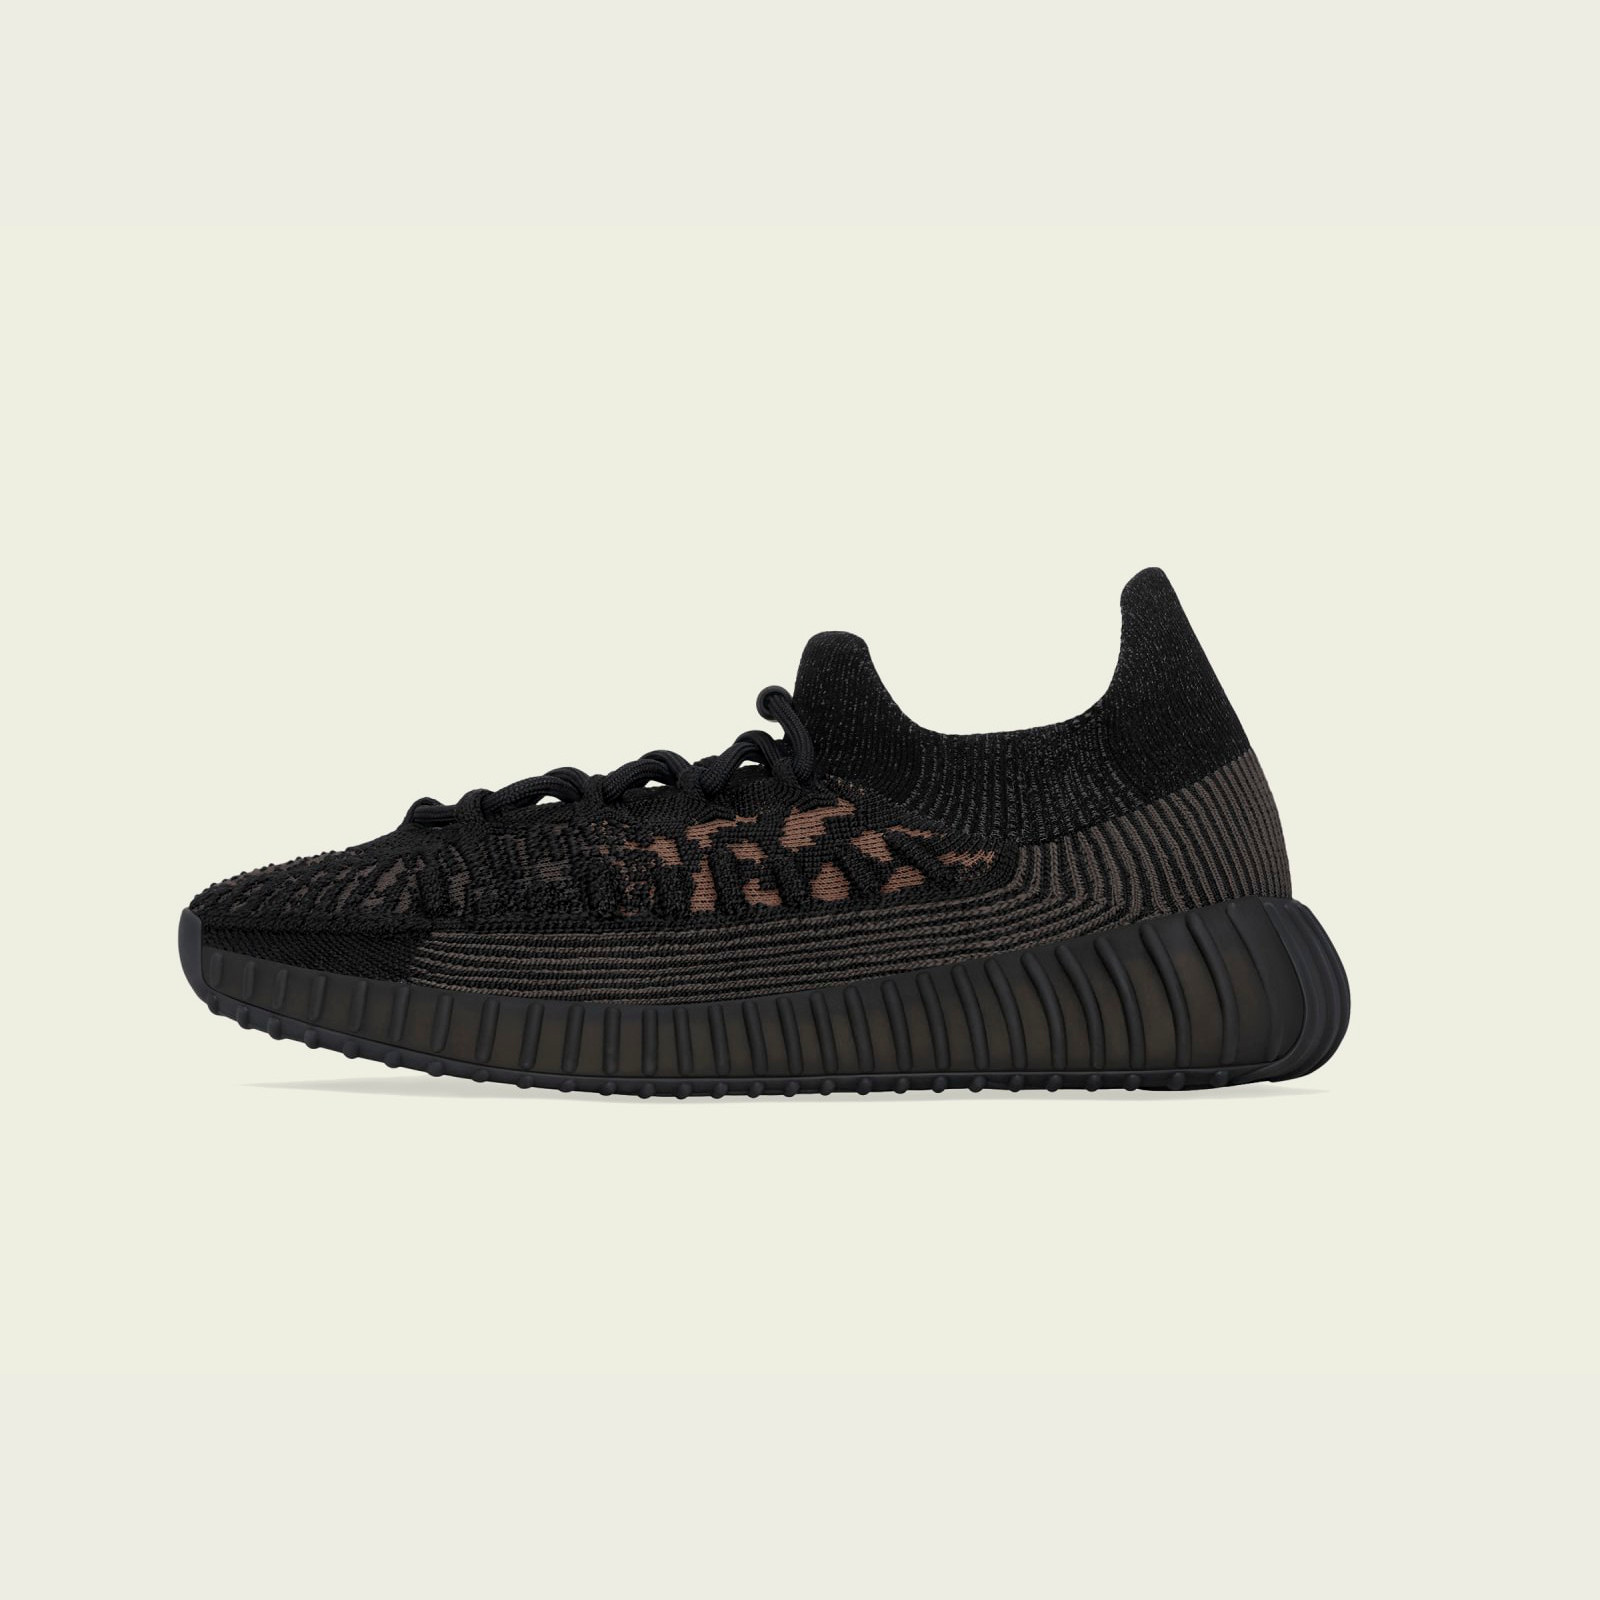 Adidas Yeezy Boost 350
V2 CMPCT
« Slate Carbon »